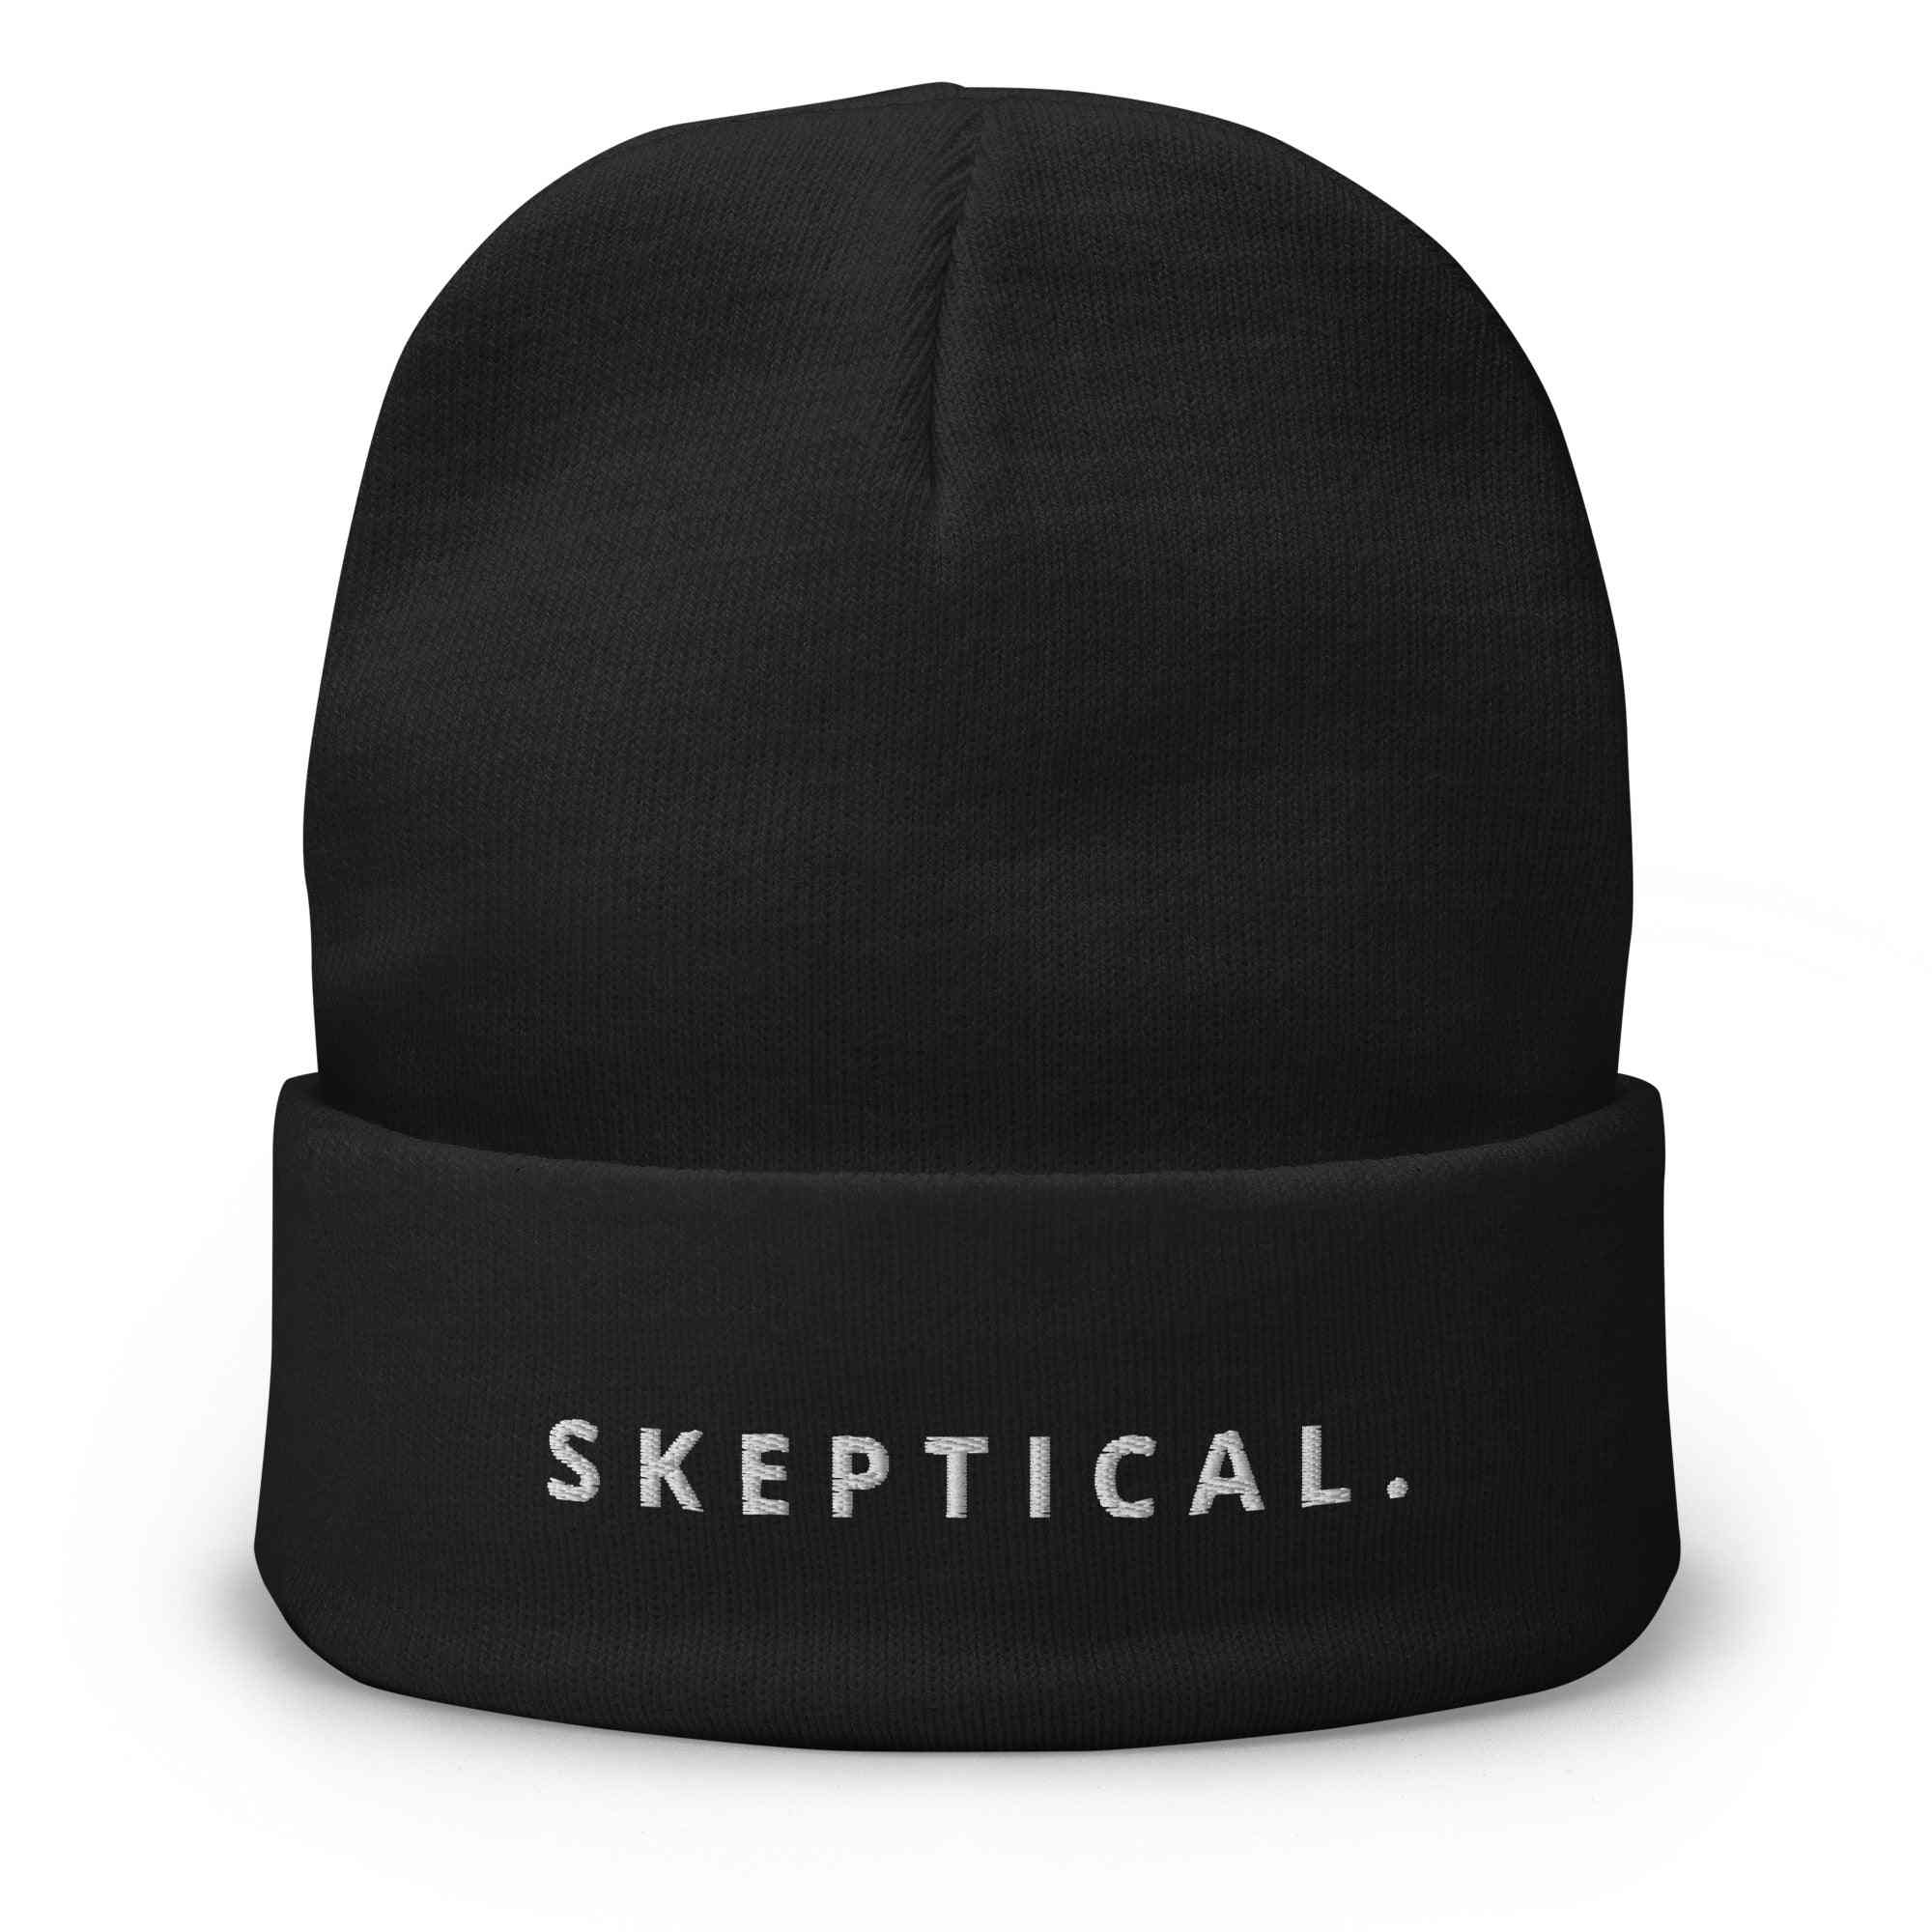 SKEPTICAL BRANDS Embroidered Beanie